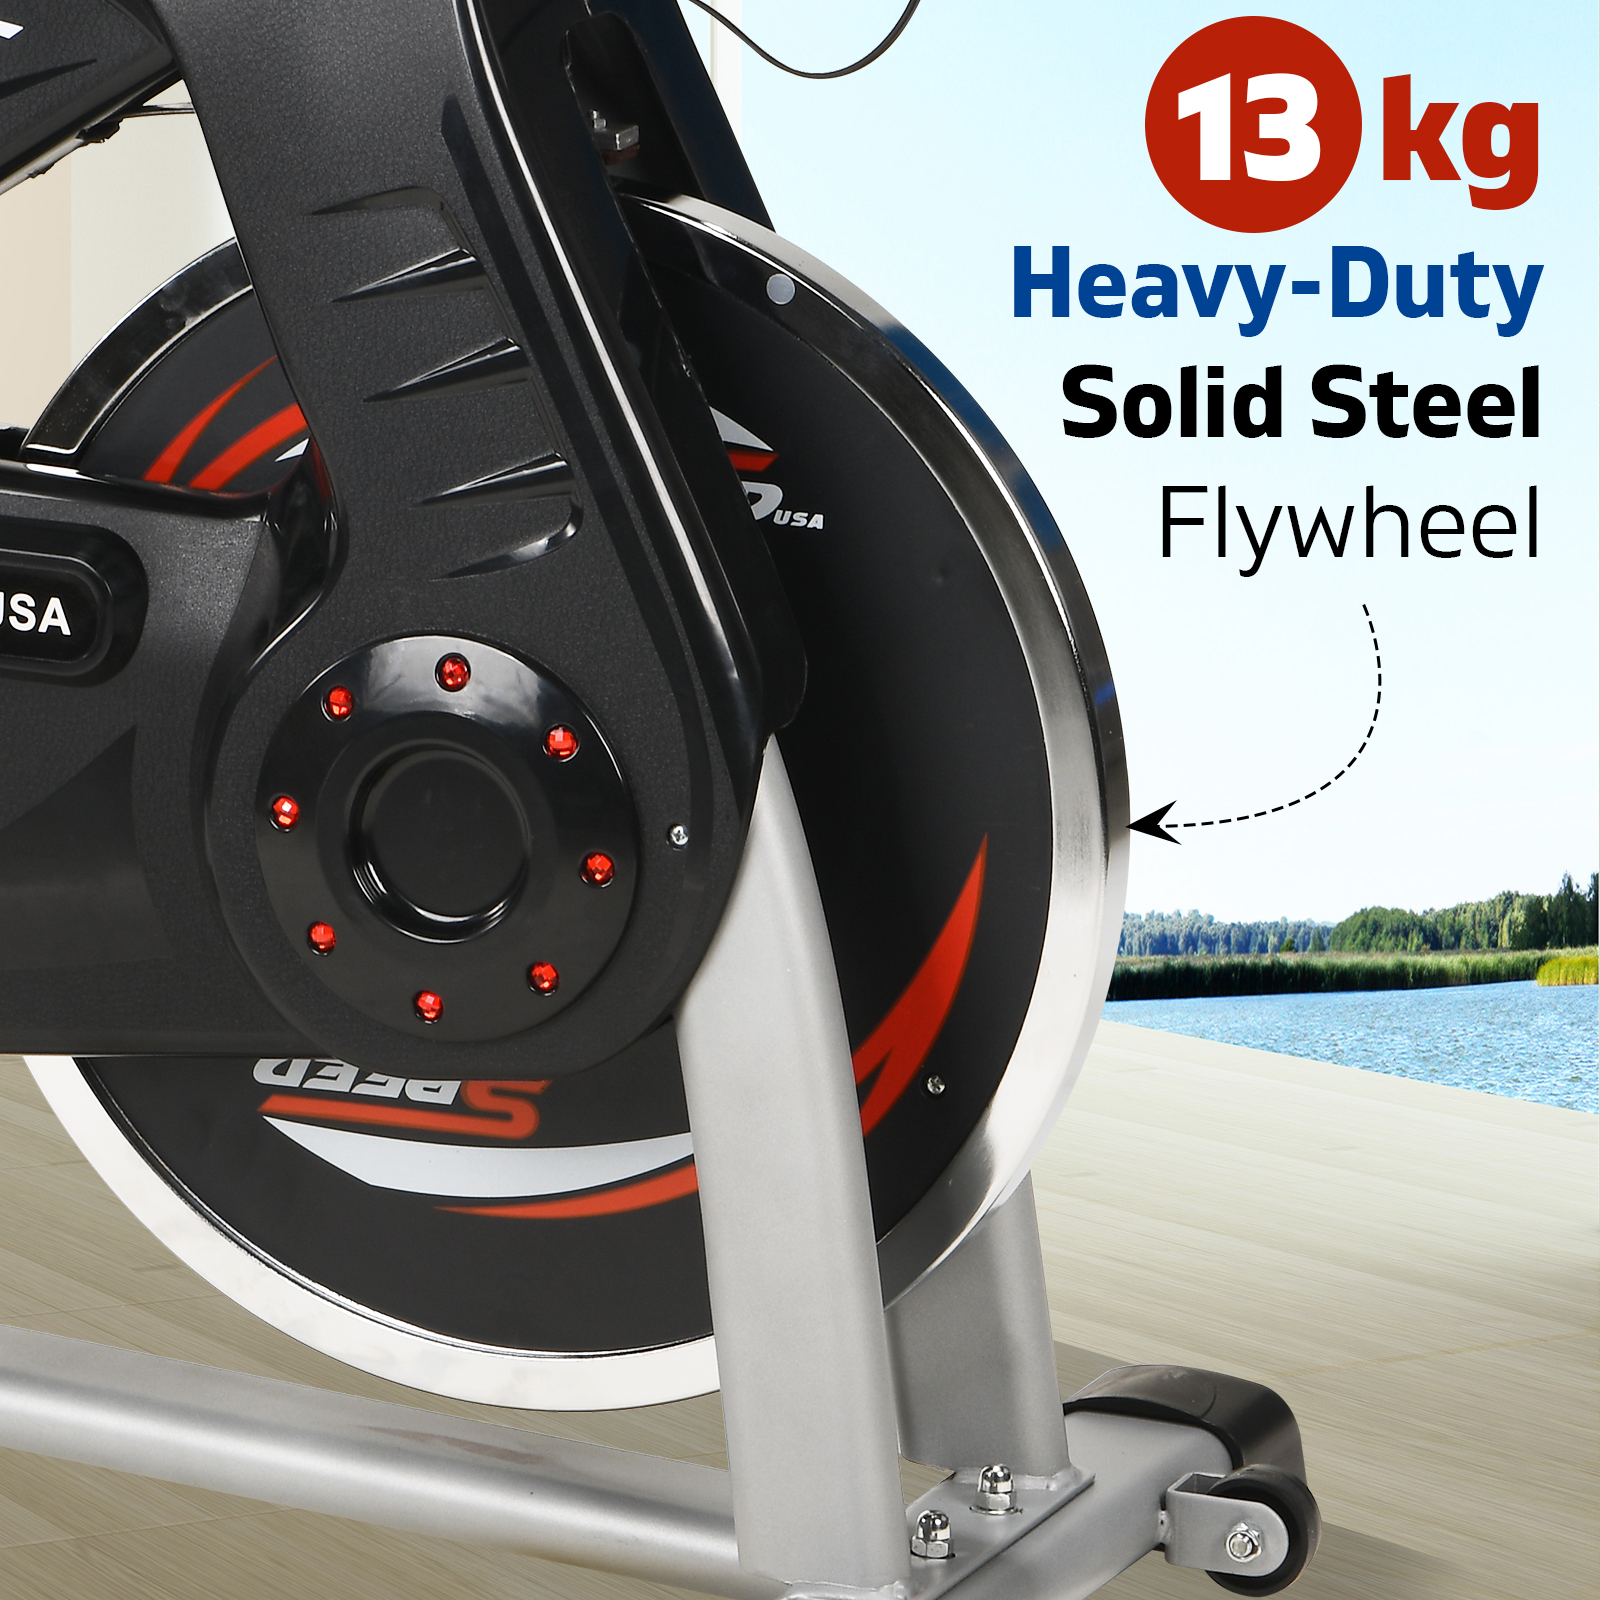 NORFLX Spin Bike Flywheel Commercial Gym Exercise Home Workout Bike Fitness Silver